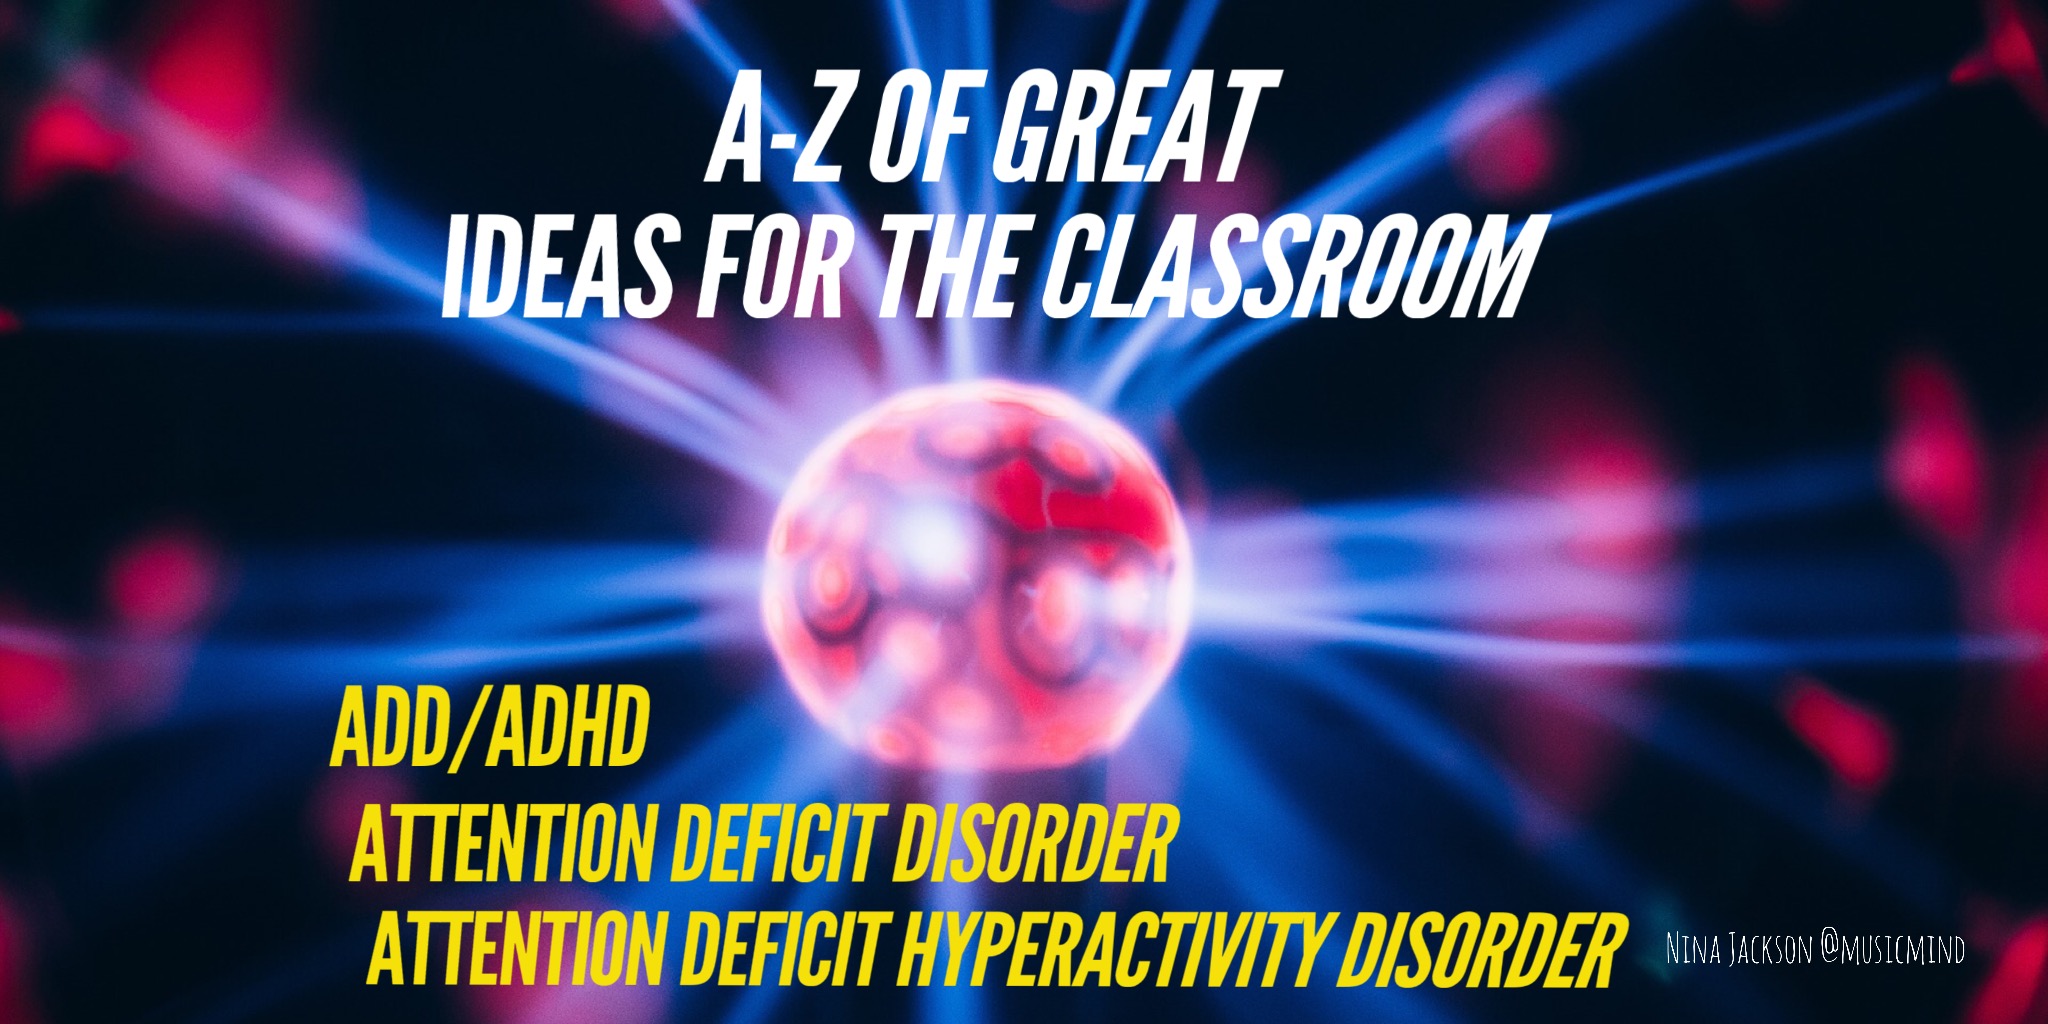 A-Z of great ideas for the classroom – ADD/ADHD